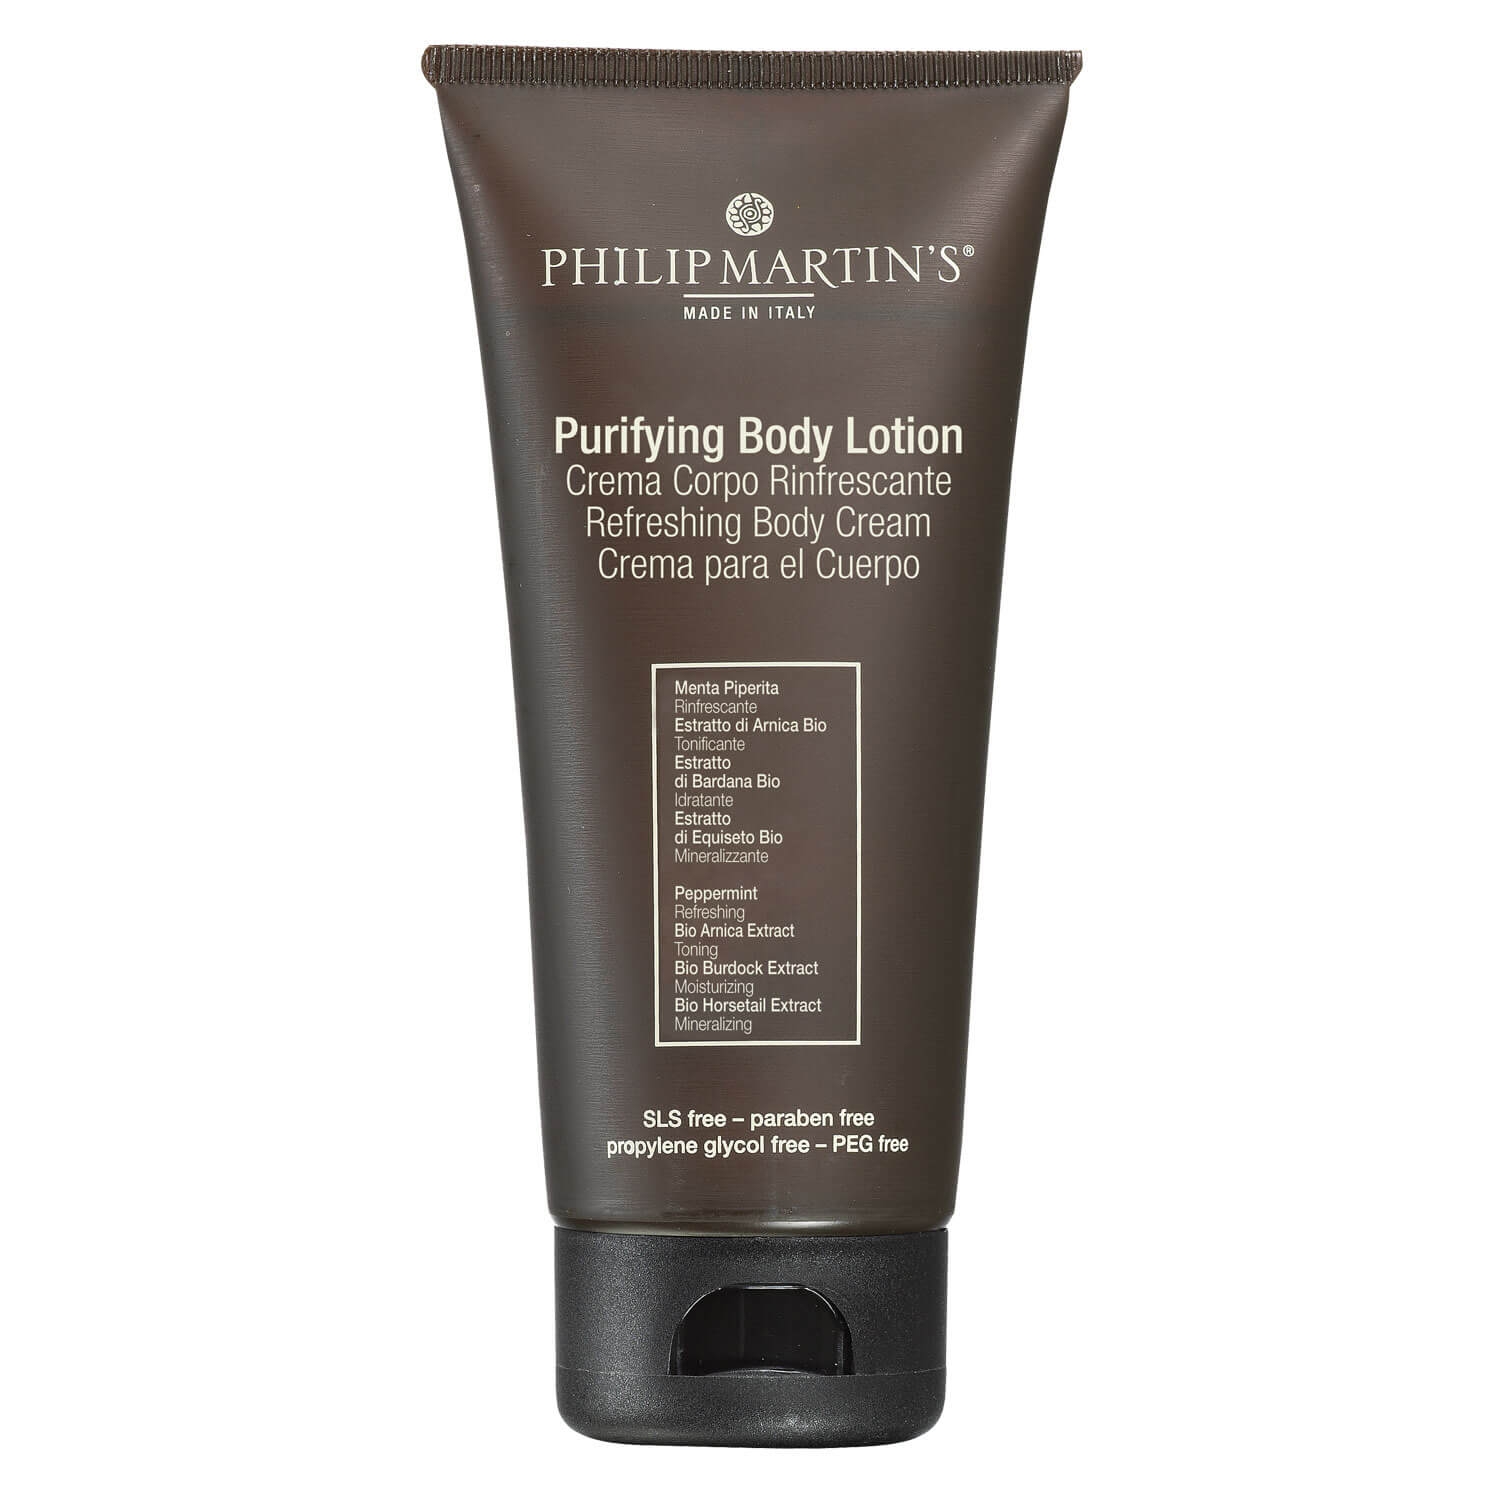 Product image from Philip Martin's - Purifying Body Lotion